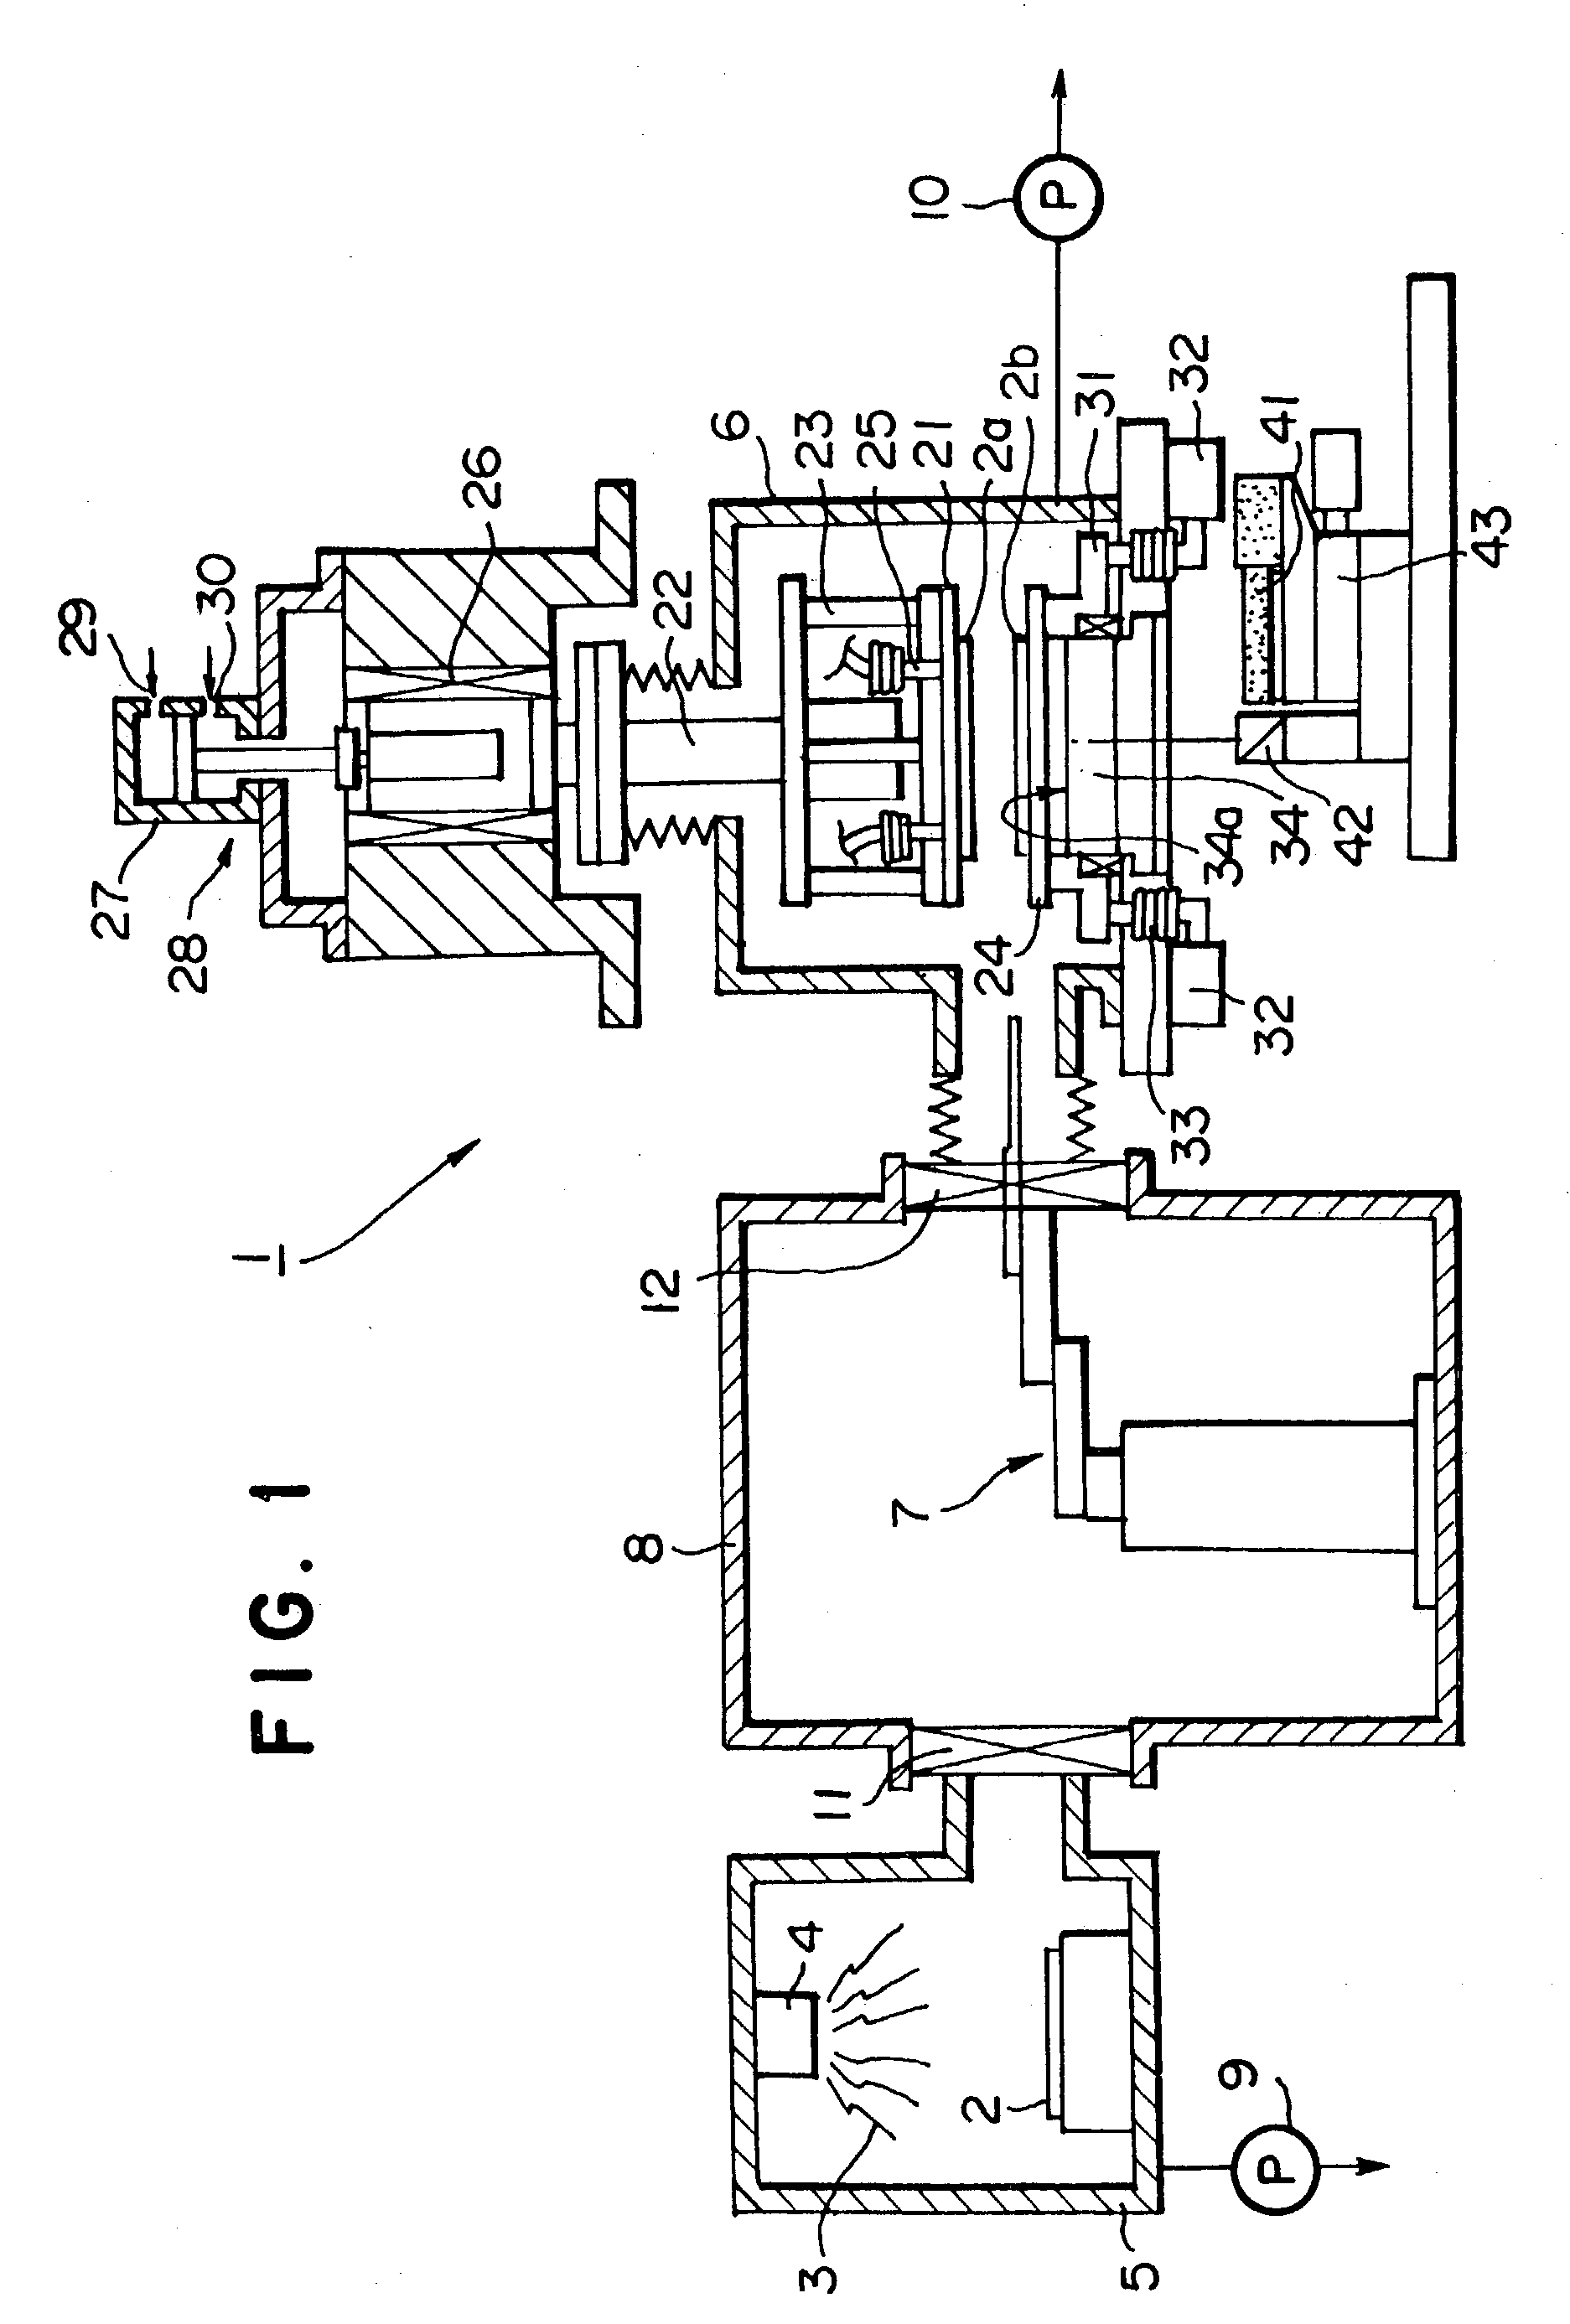 Method and apparatus for mounting